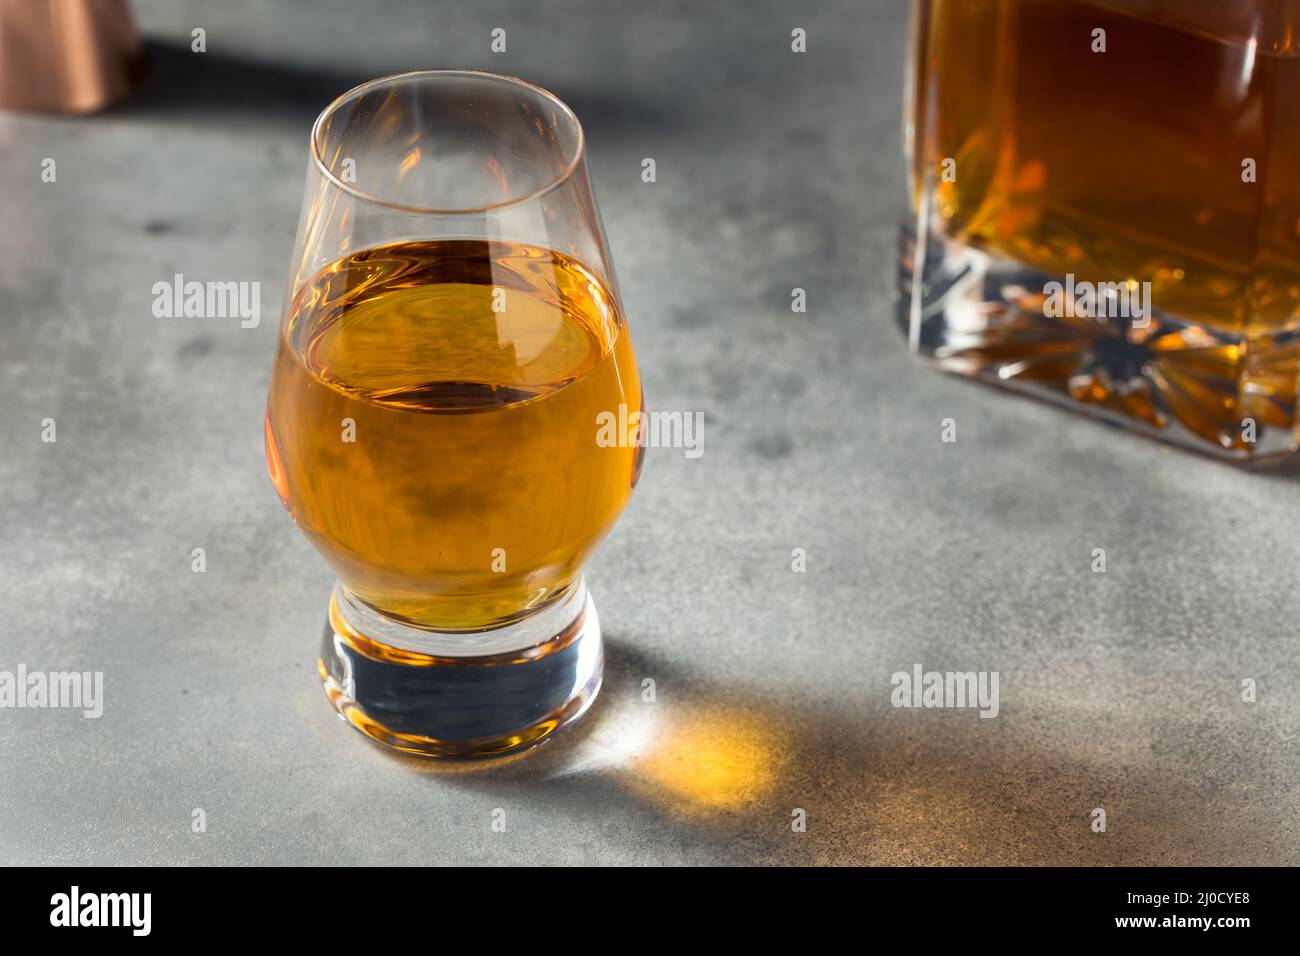 Boozy Whiskey in a Snifter Glass Ready to Drink Stock Photo